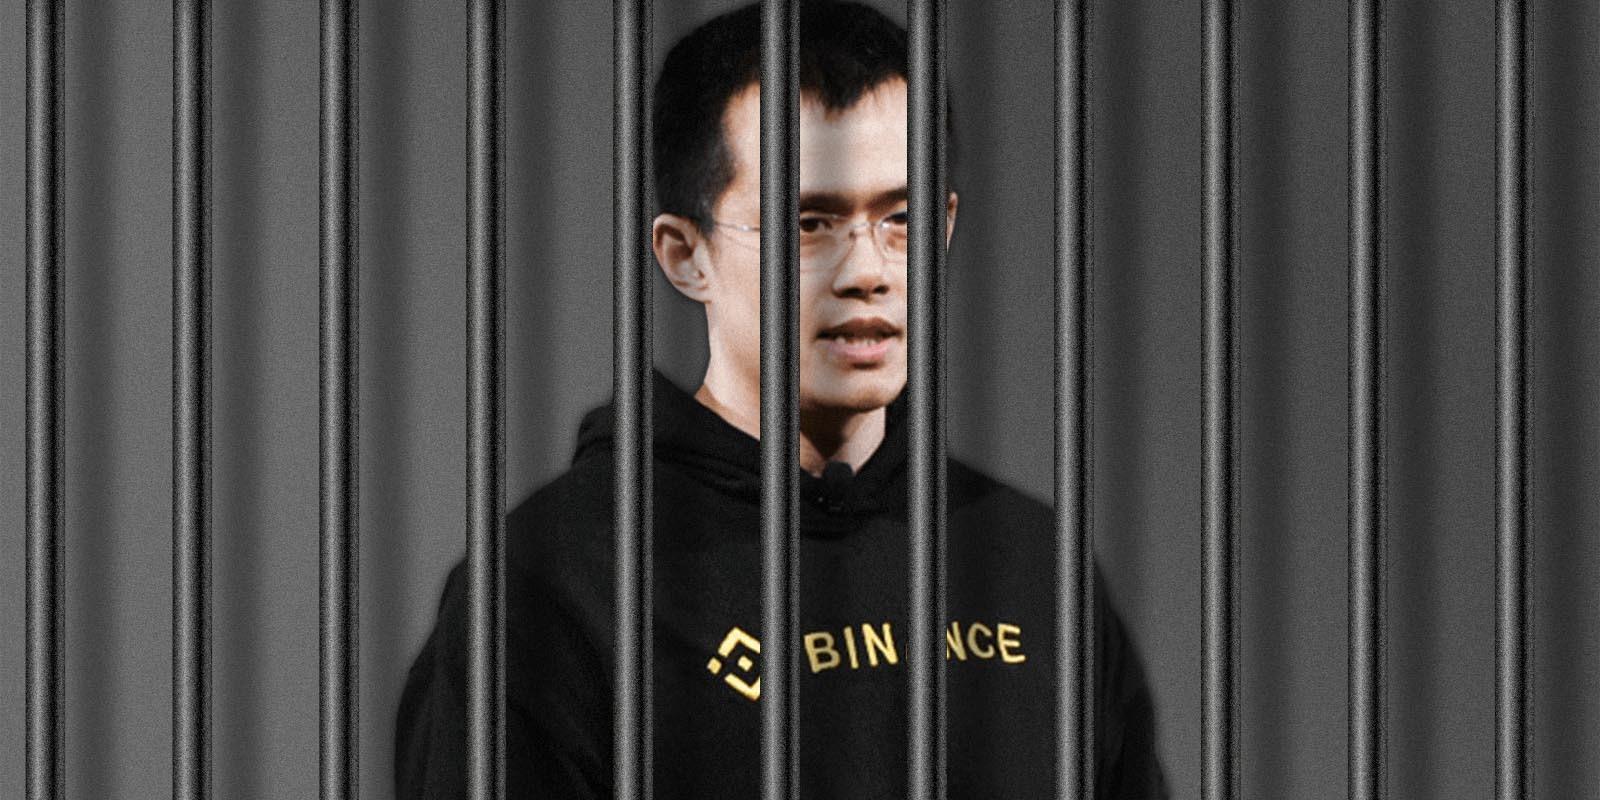 Binance Pleaded Guilty, But The Exchange Can Keep Running